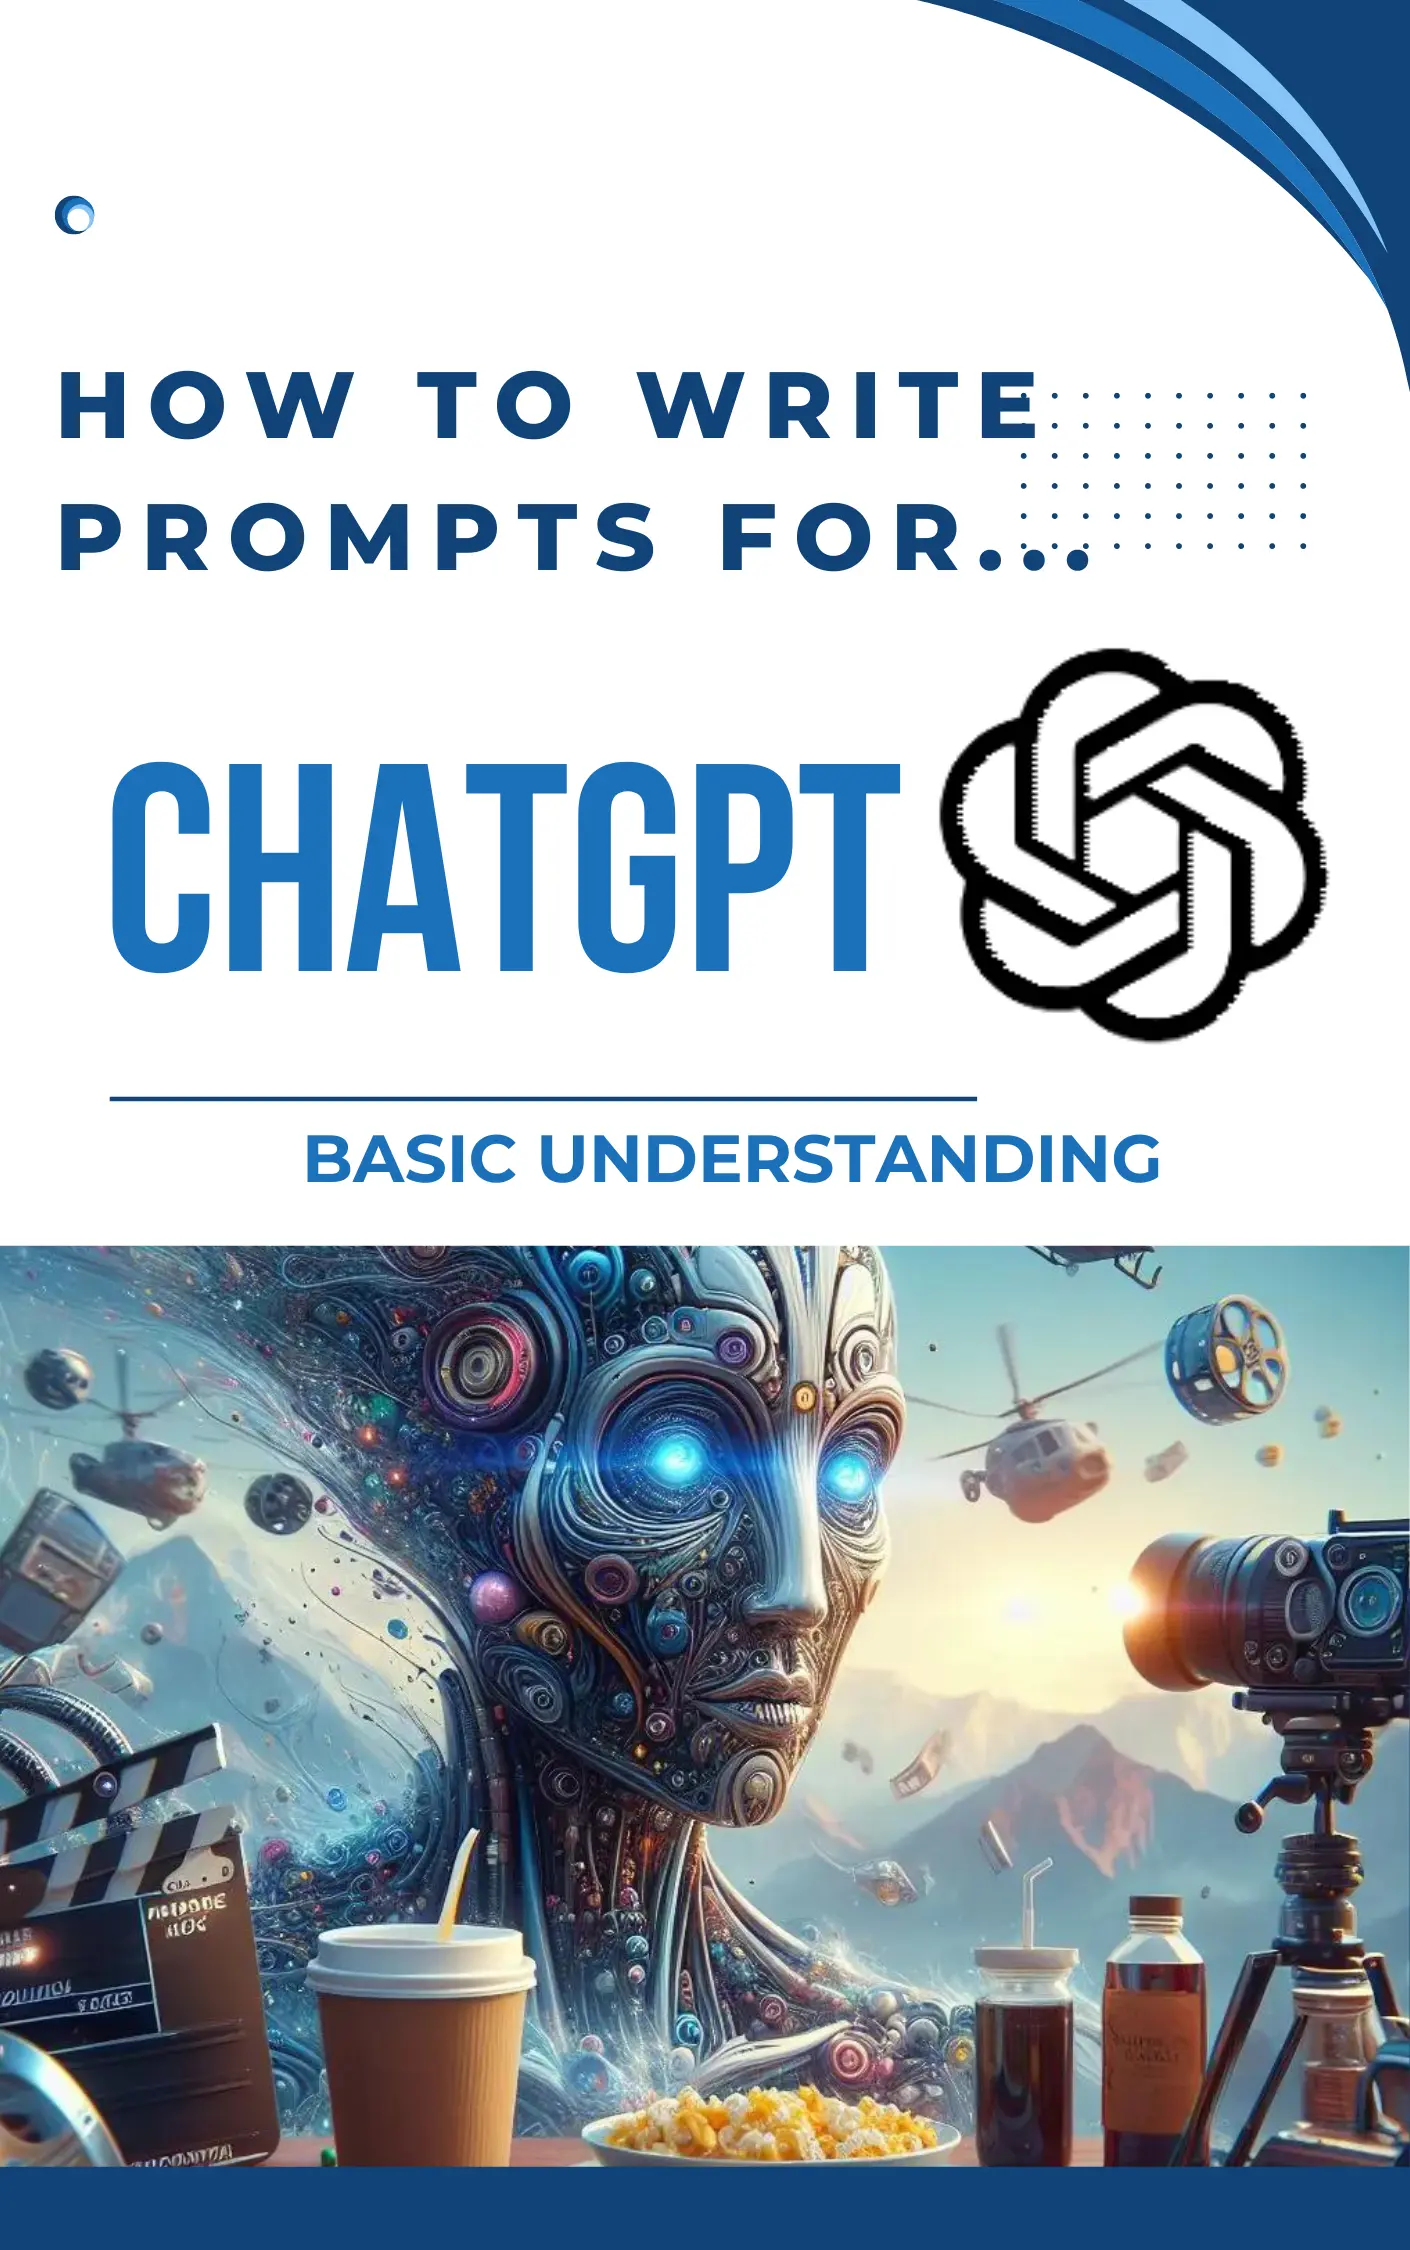 How to Write Prompts for ChatGPT